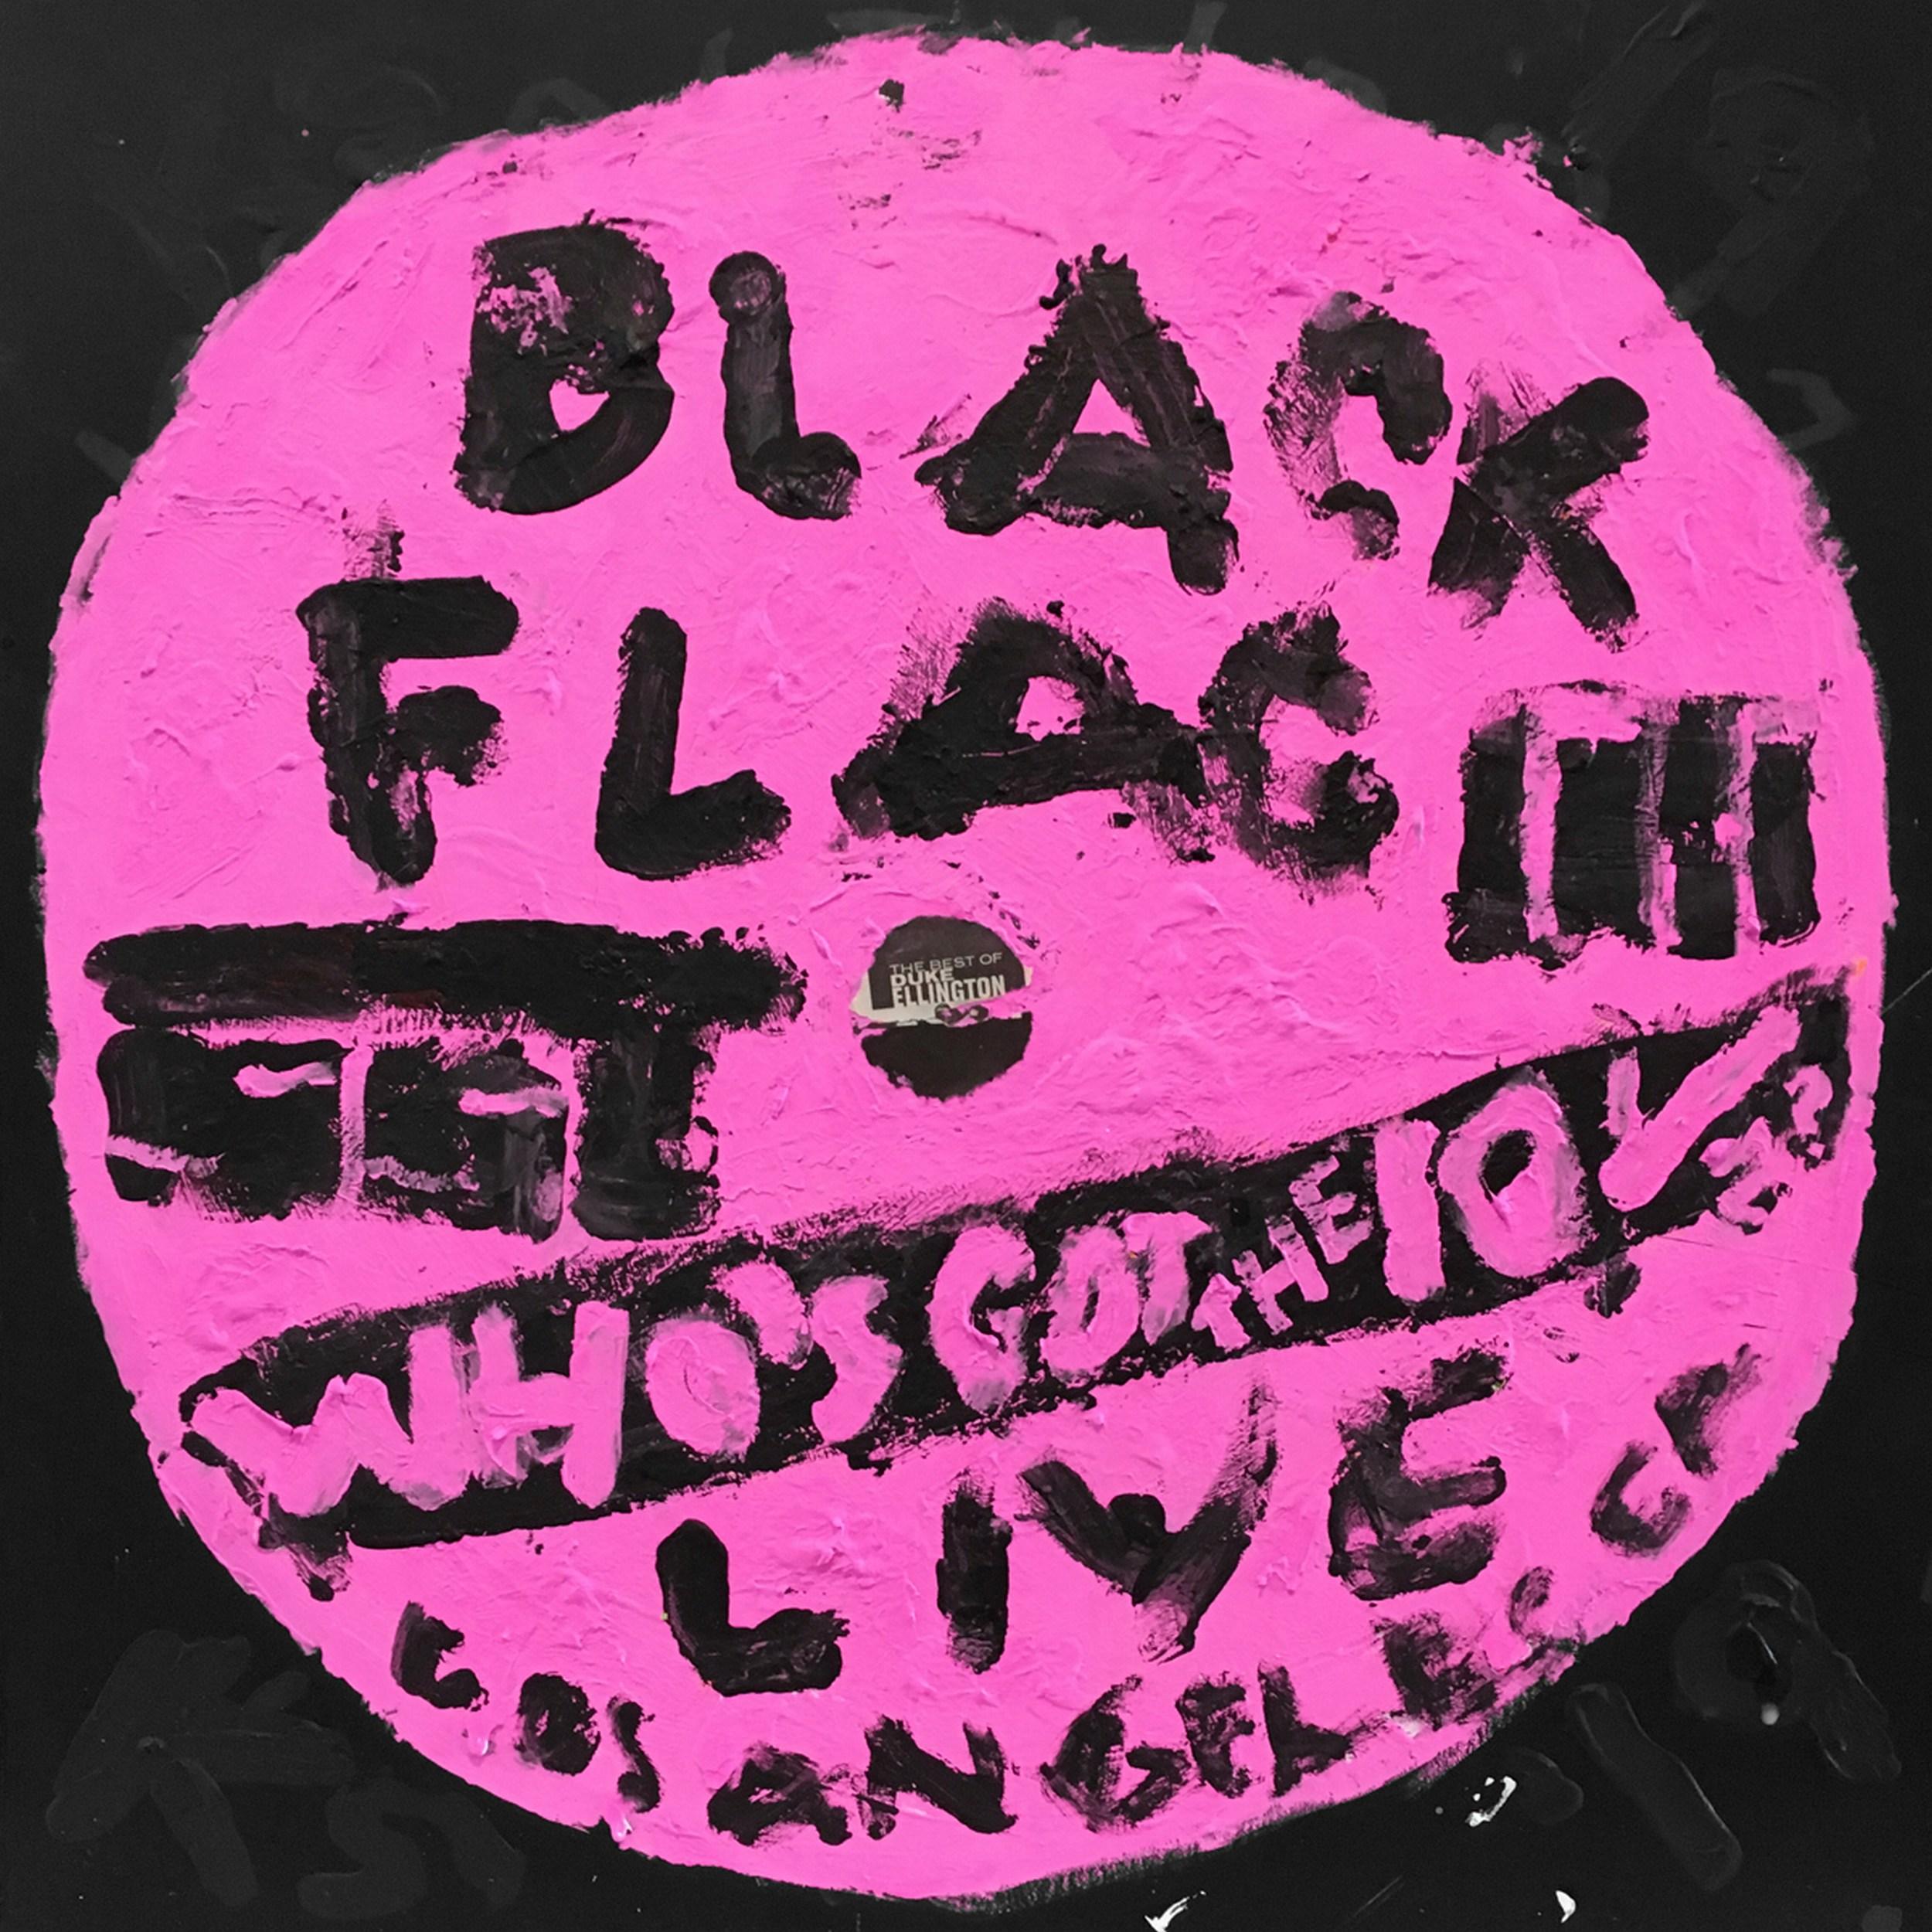 Kerry Smith Figurative Painting – Black Flag - Who's Got The 10 1/2? (Grammy, Albumkunst, Ikonisches, Rock and Roll)